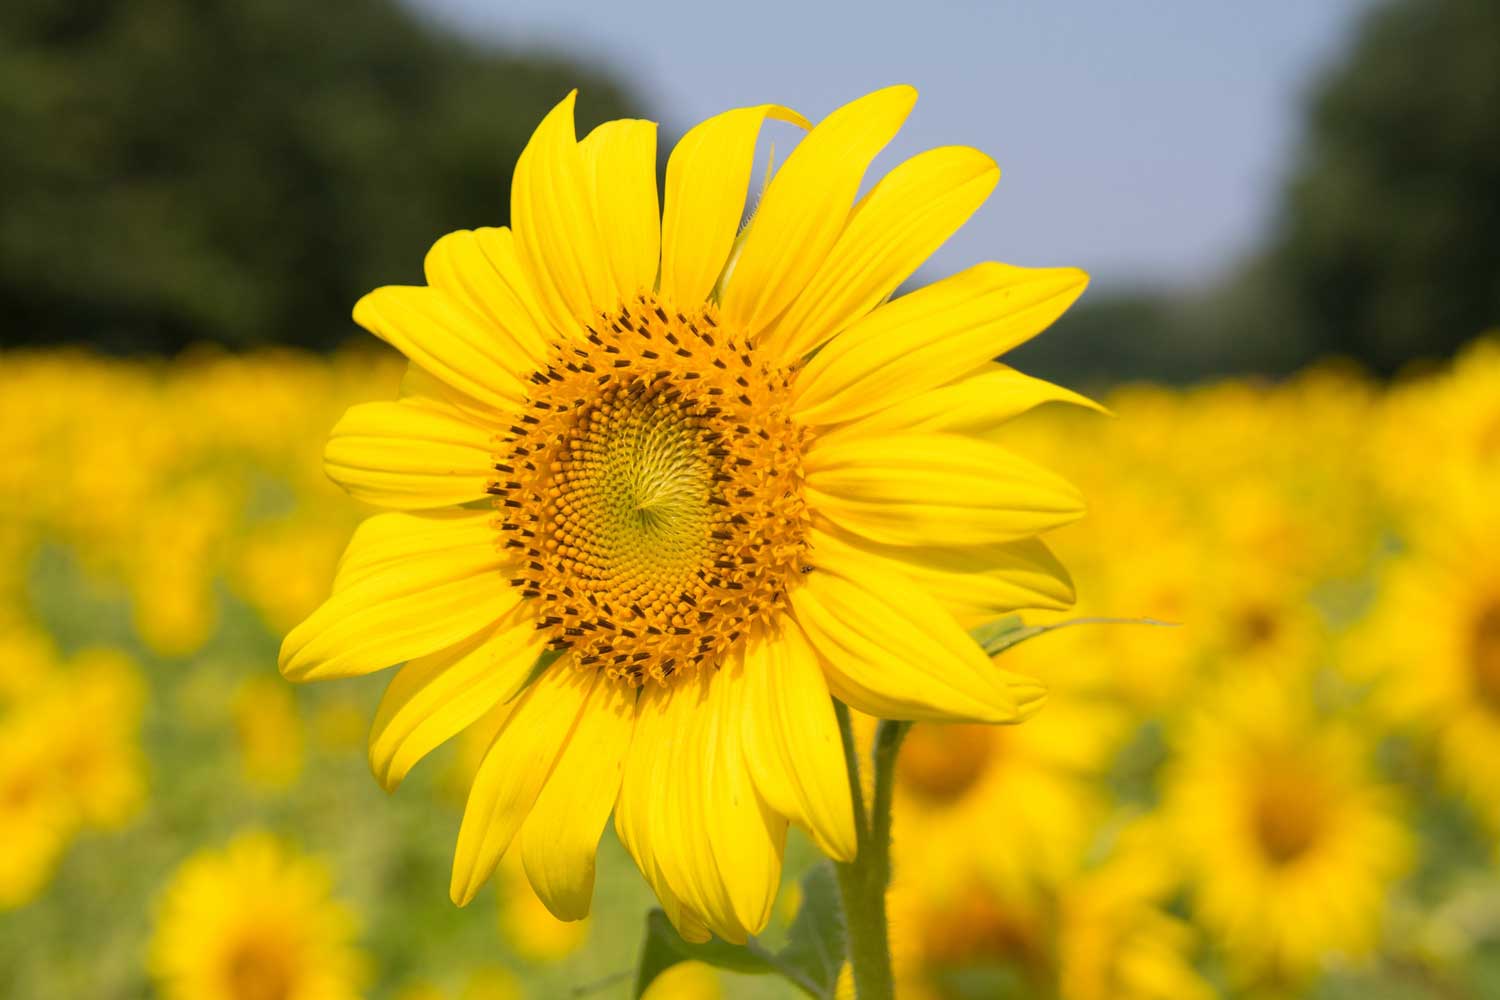 A bright yellow sunflower in a field.